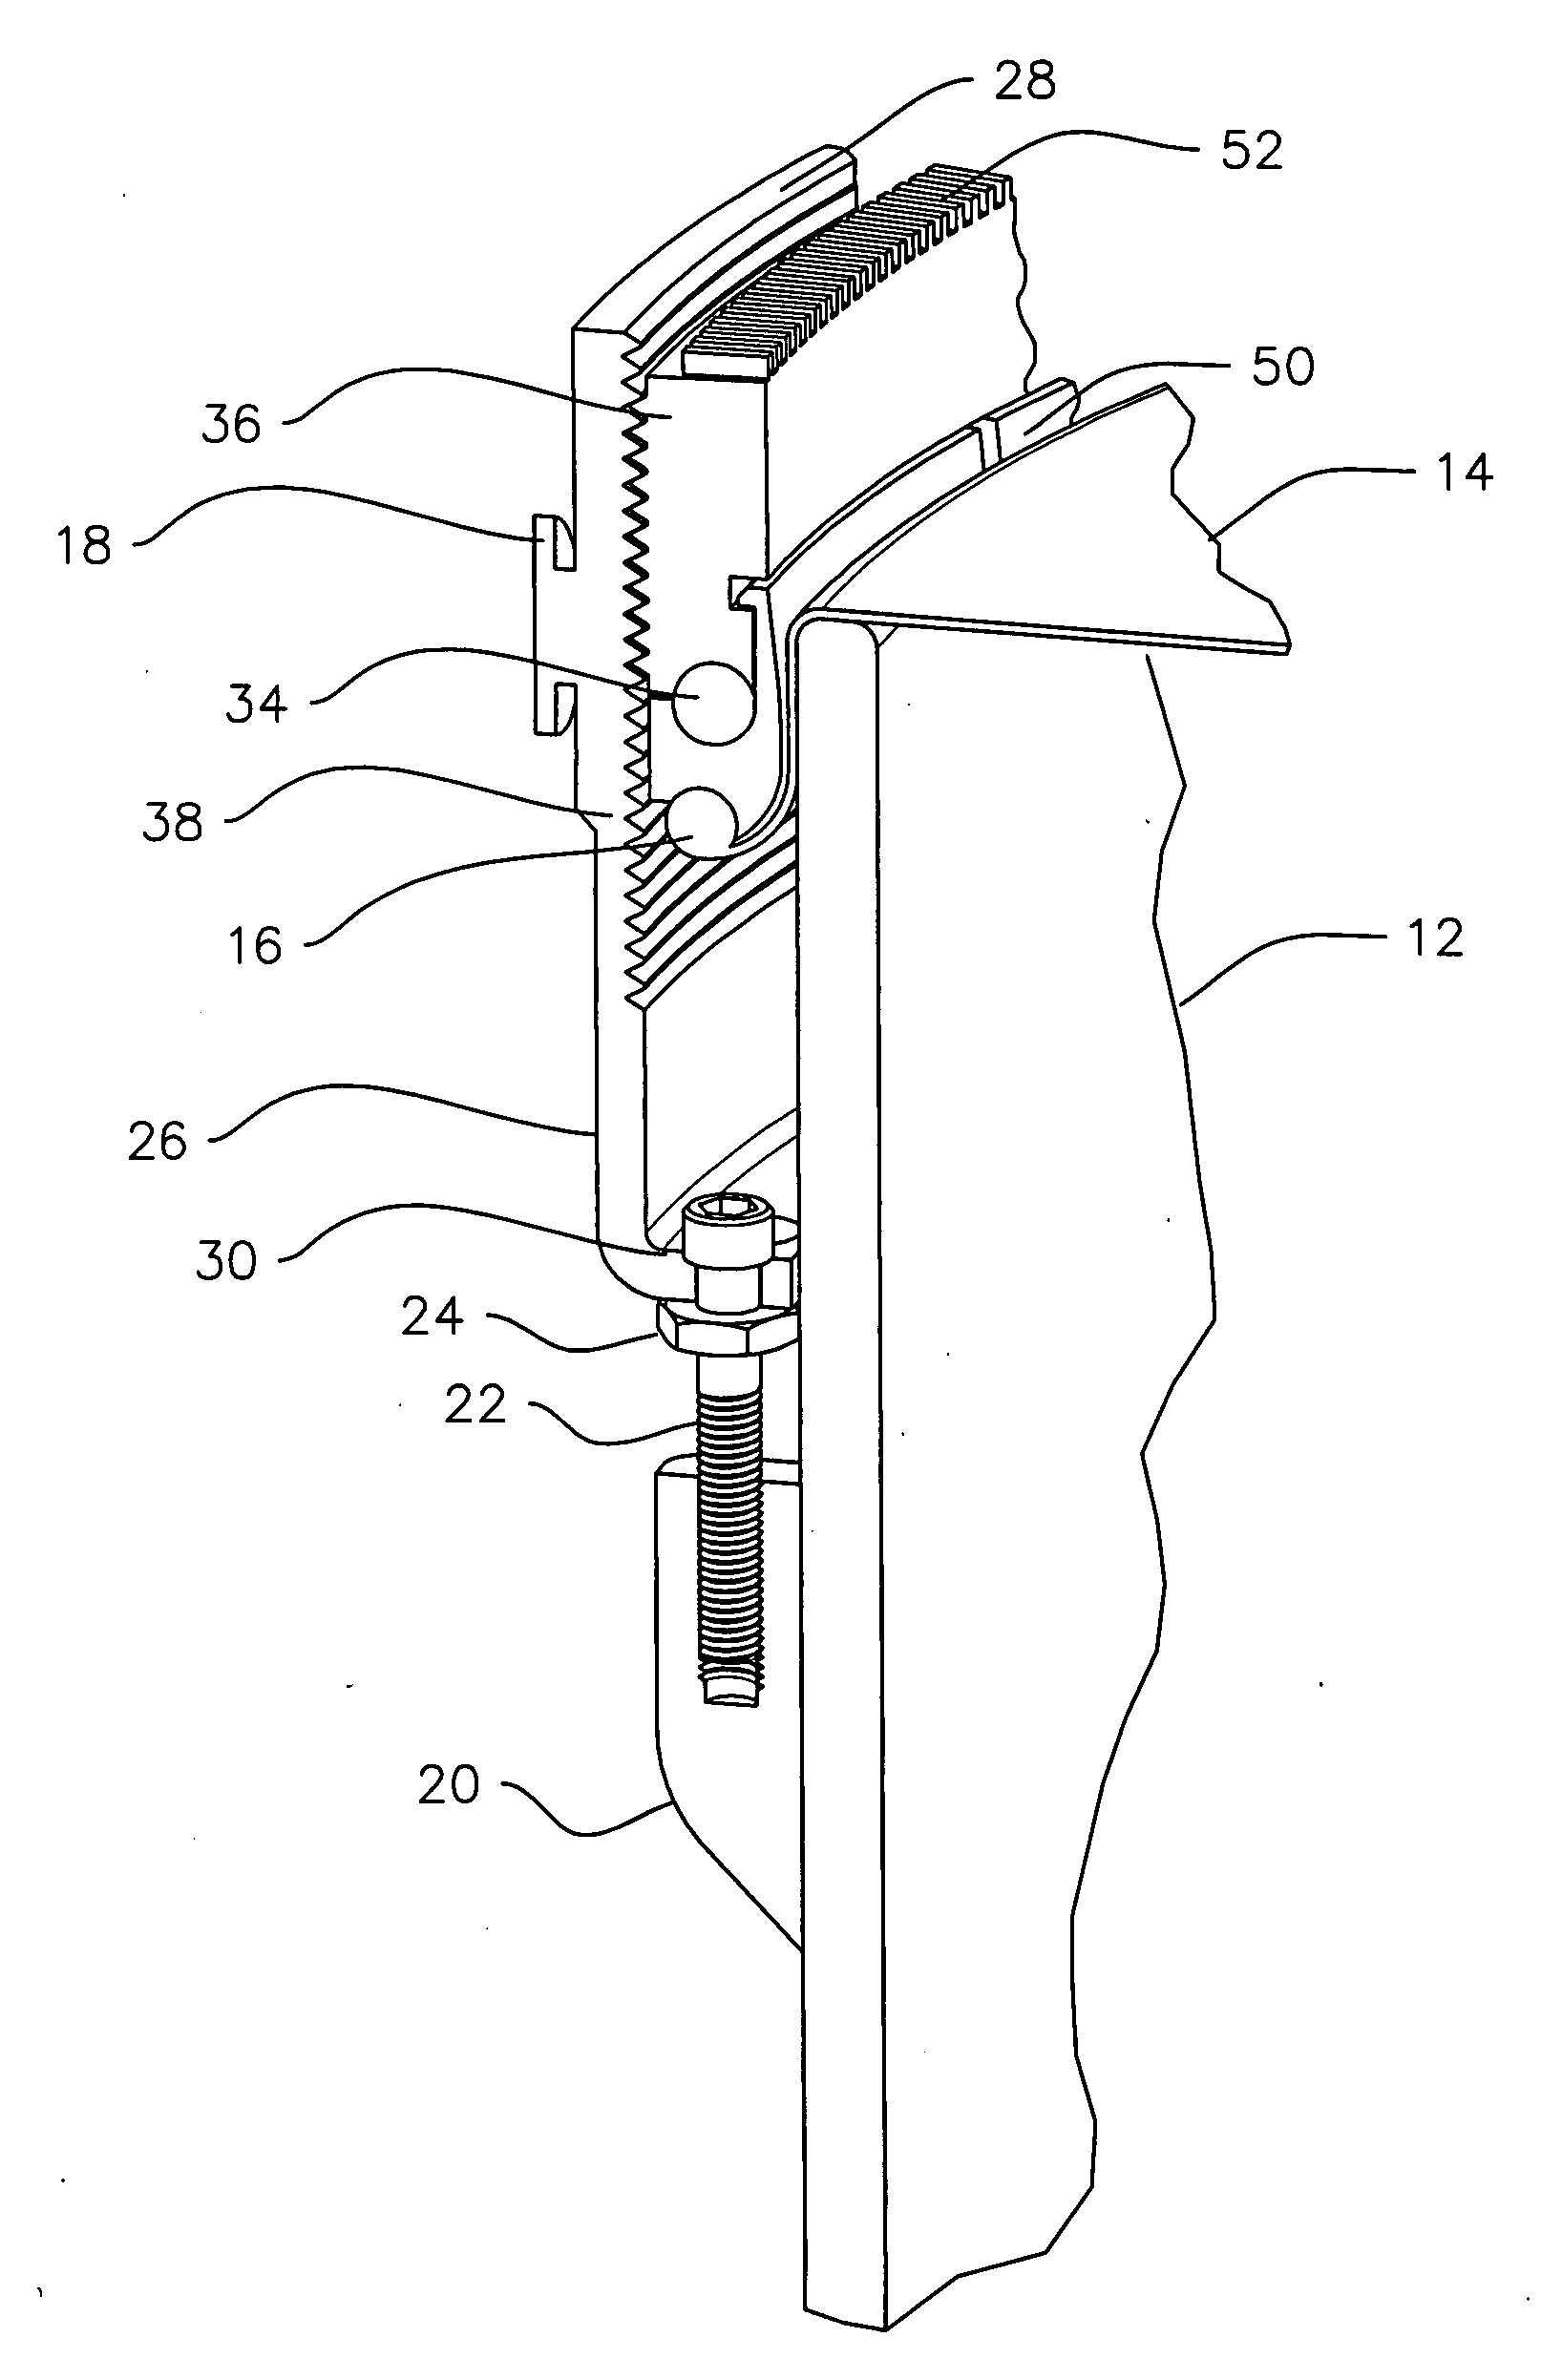 Method and apparatus for tuning a musical drum